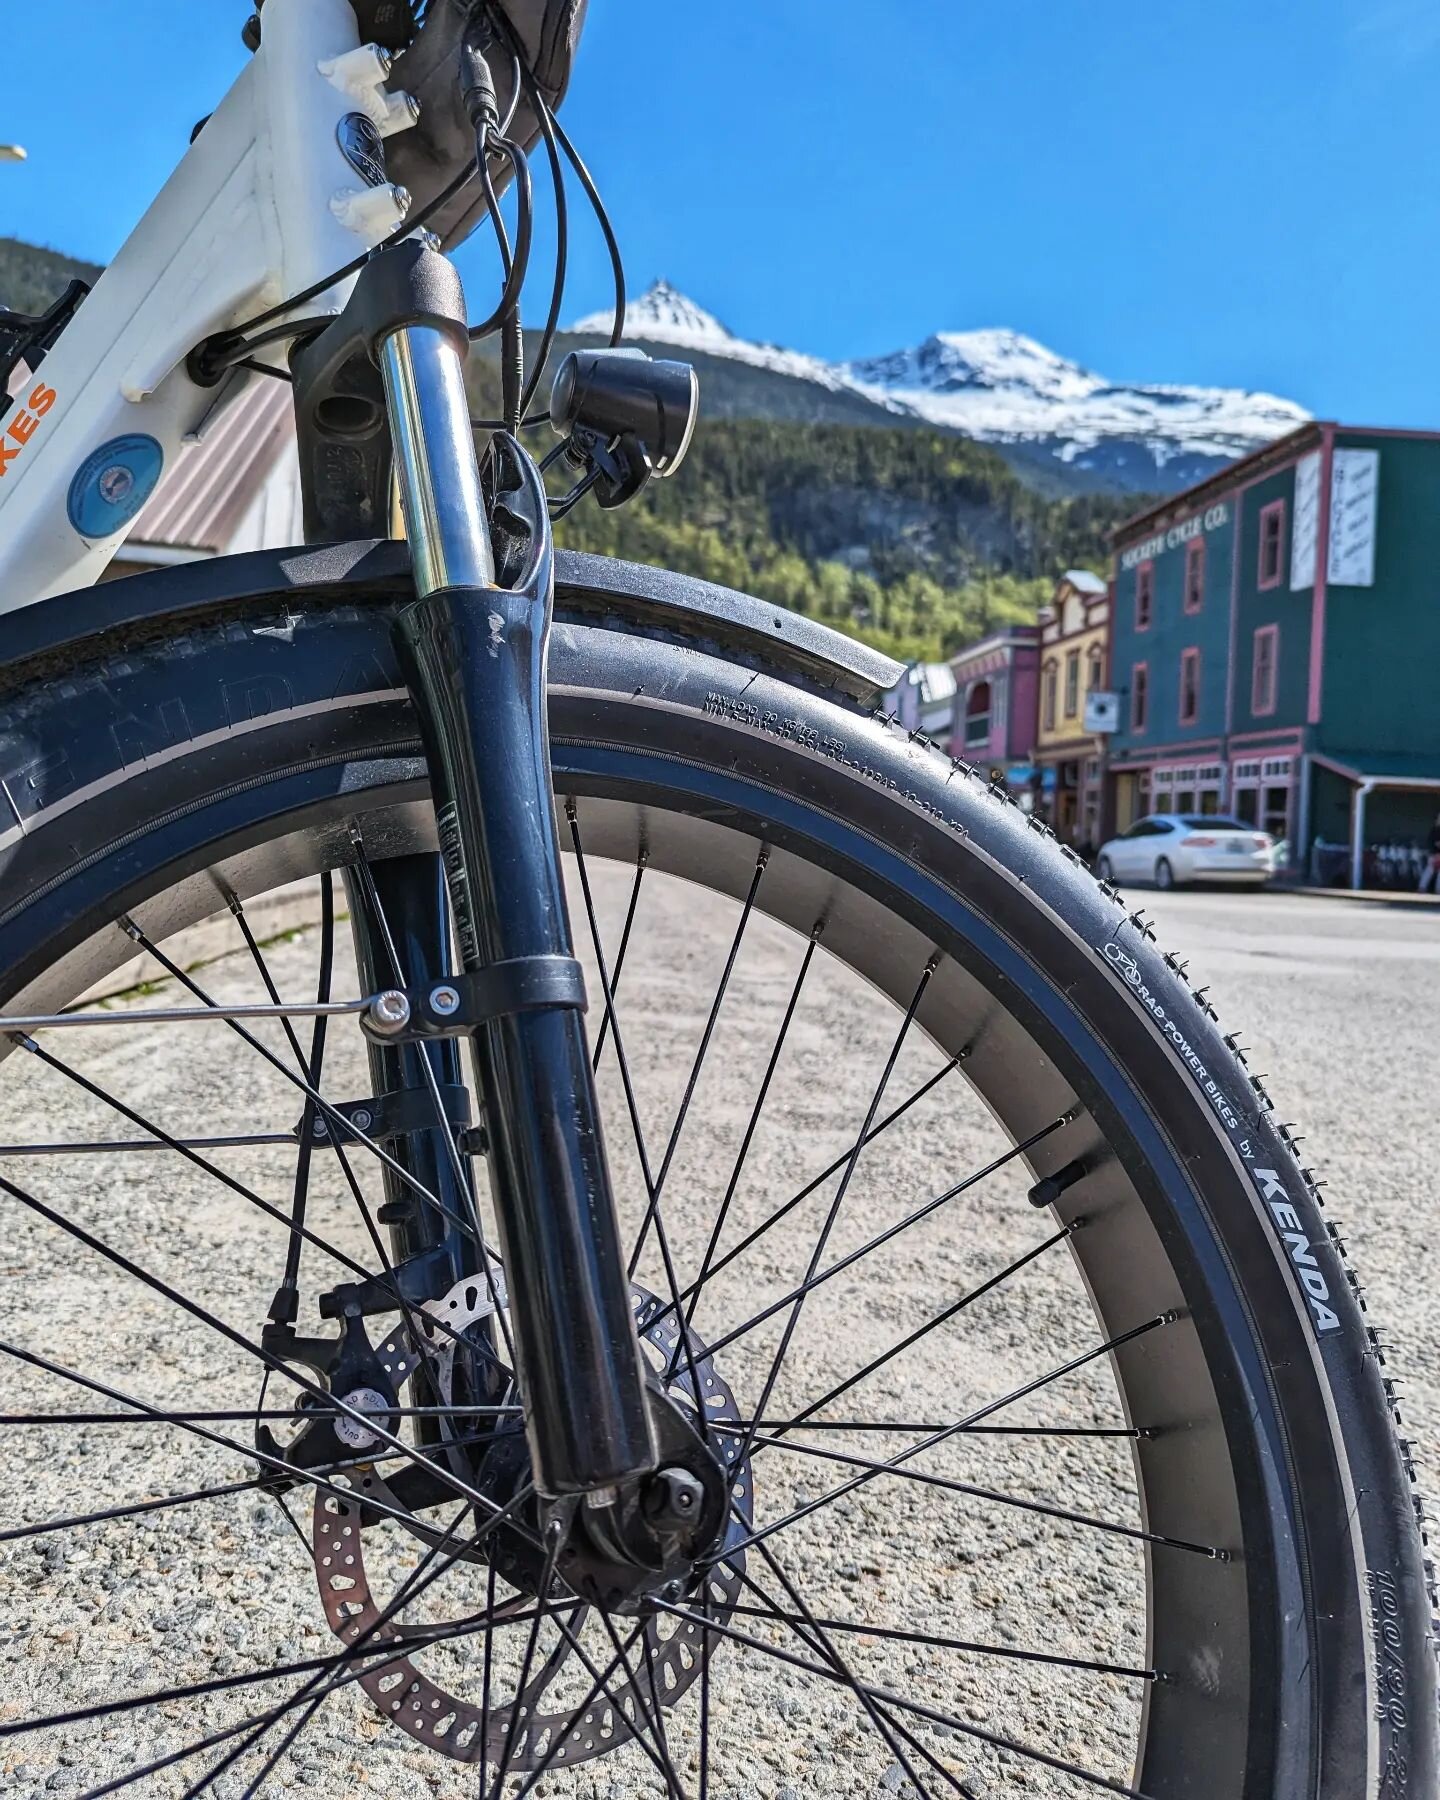 Let's talk about the weather in Skagway this week...

Perfection.

Blue skies and all the sunshine you can soak up!

Great e-bike riding weather!!!

Looking for the ultimate Skagway experience?  Book now!

#klondikebikes #klondikeelectricbikes #skagw